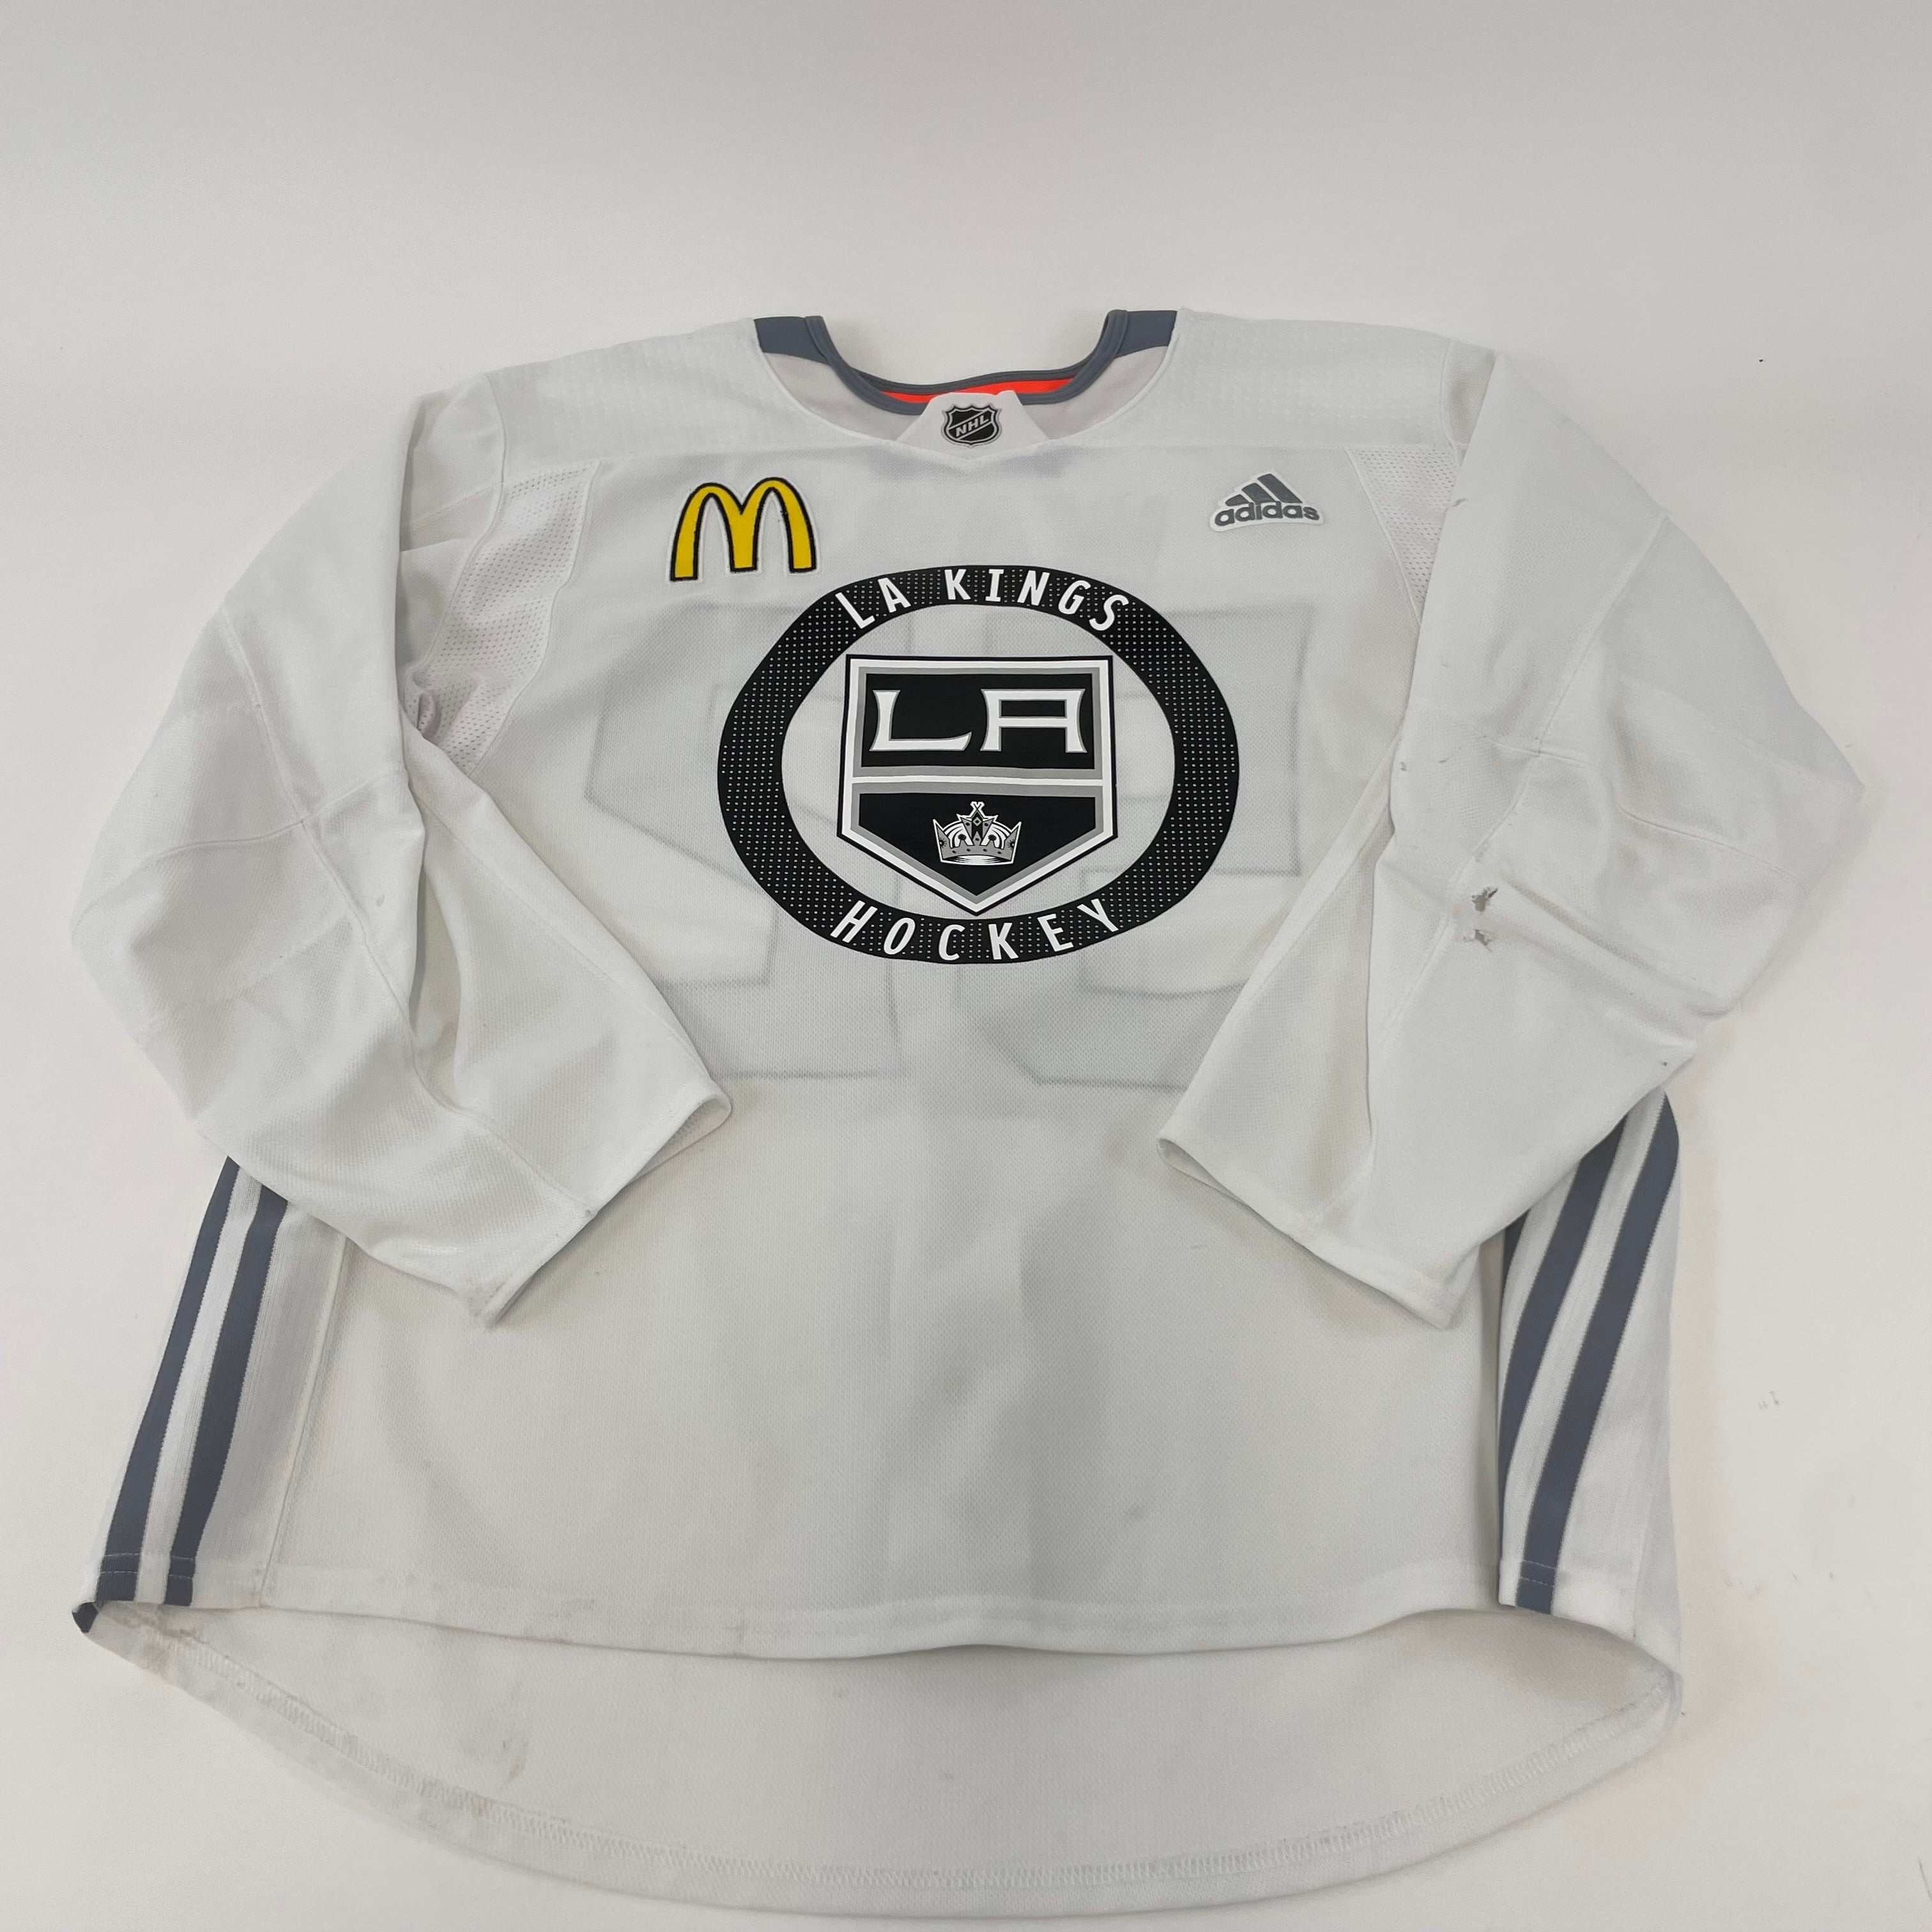 Used LA Kings White MIC Adidas Practice/Camp Jersey, Pinelli, Size 56